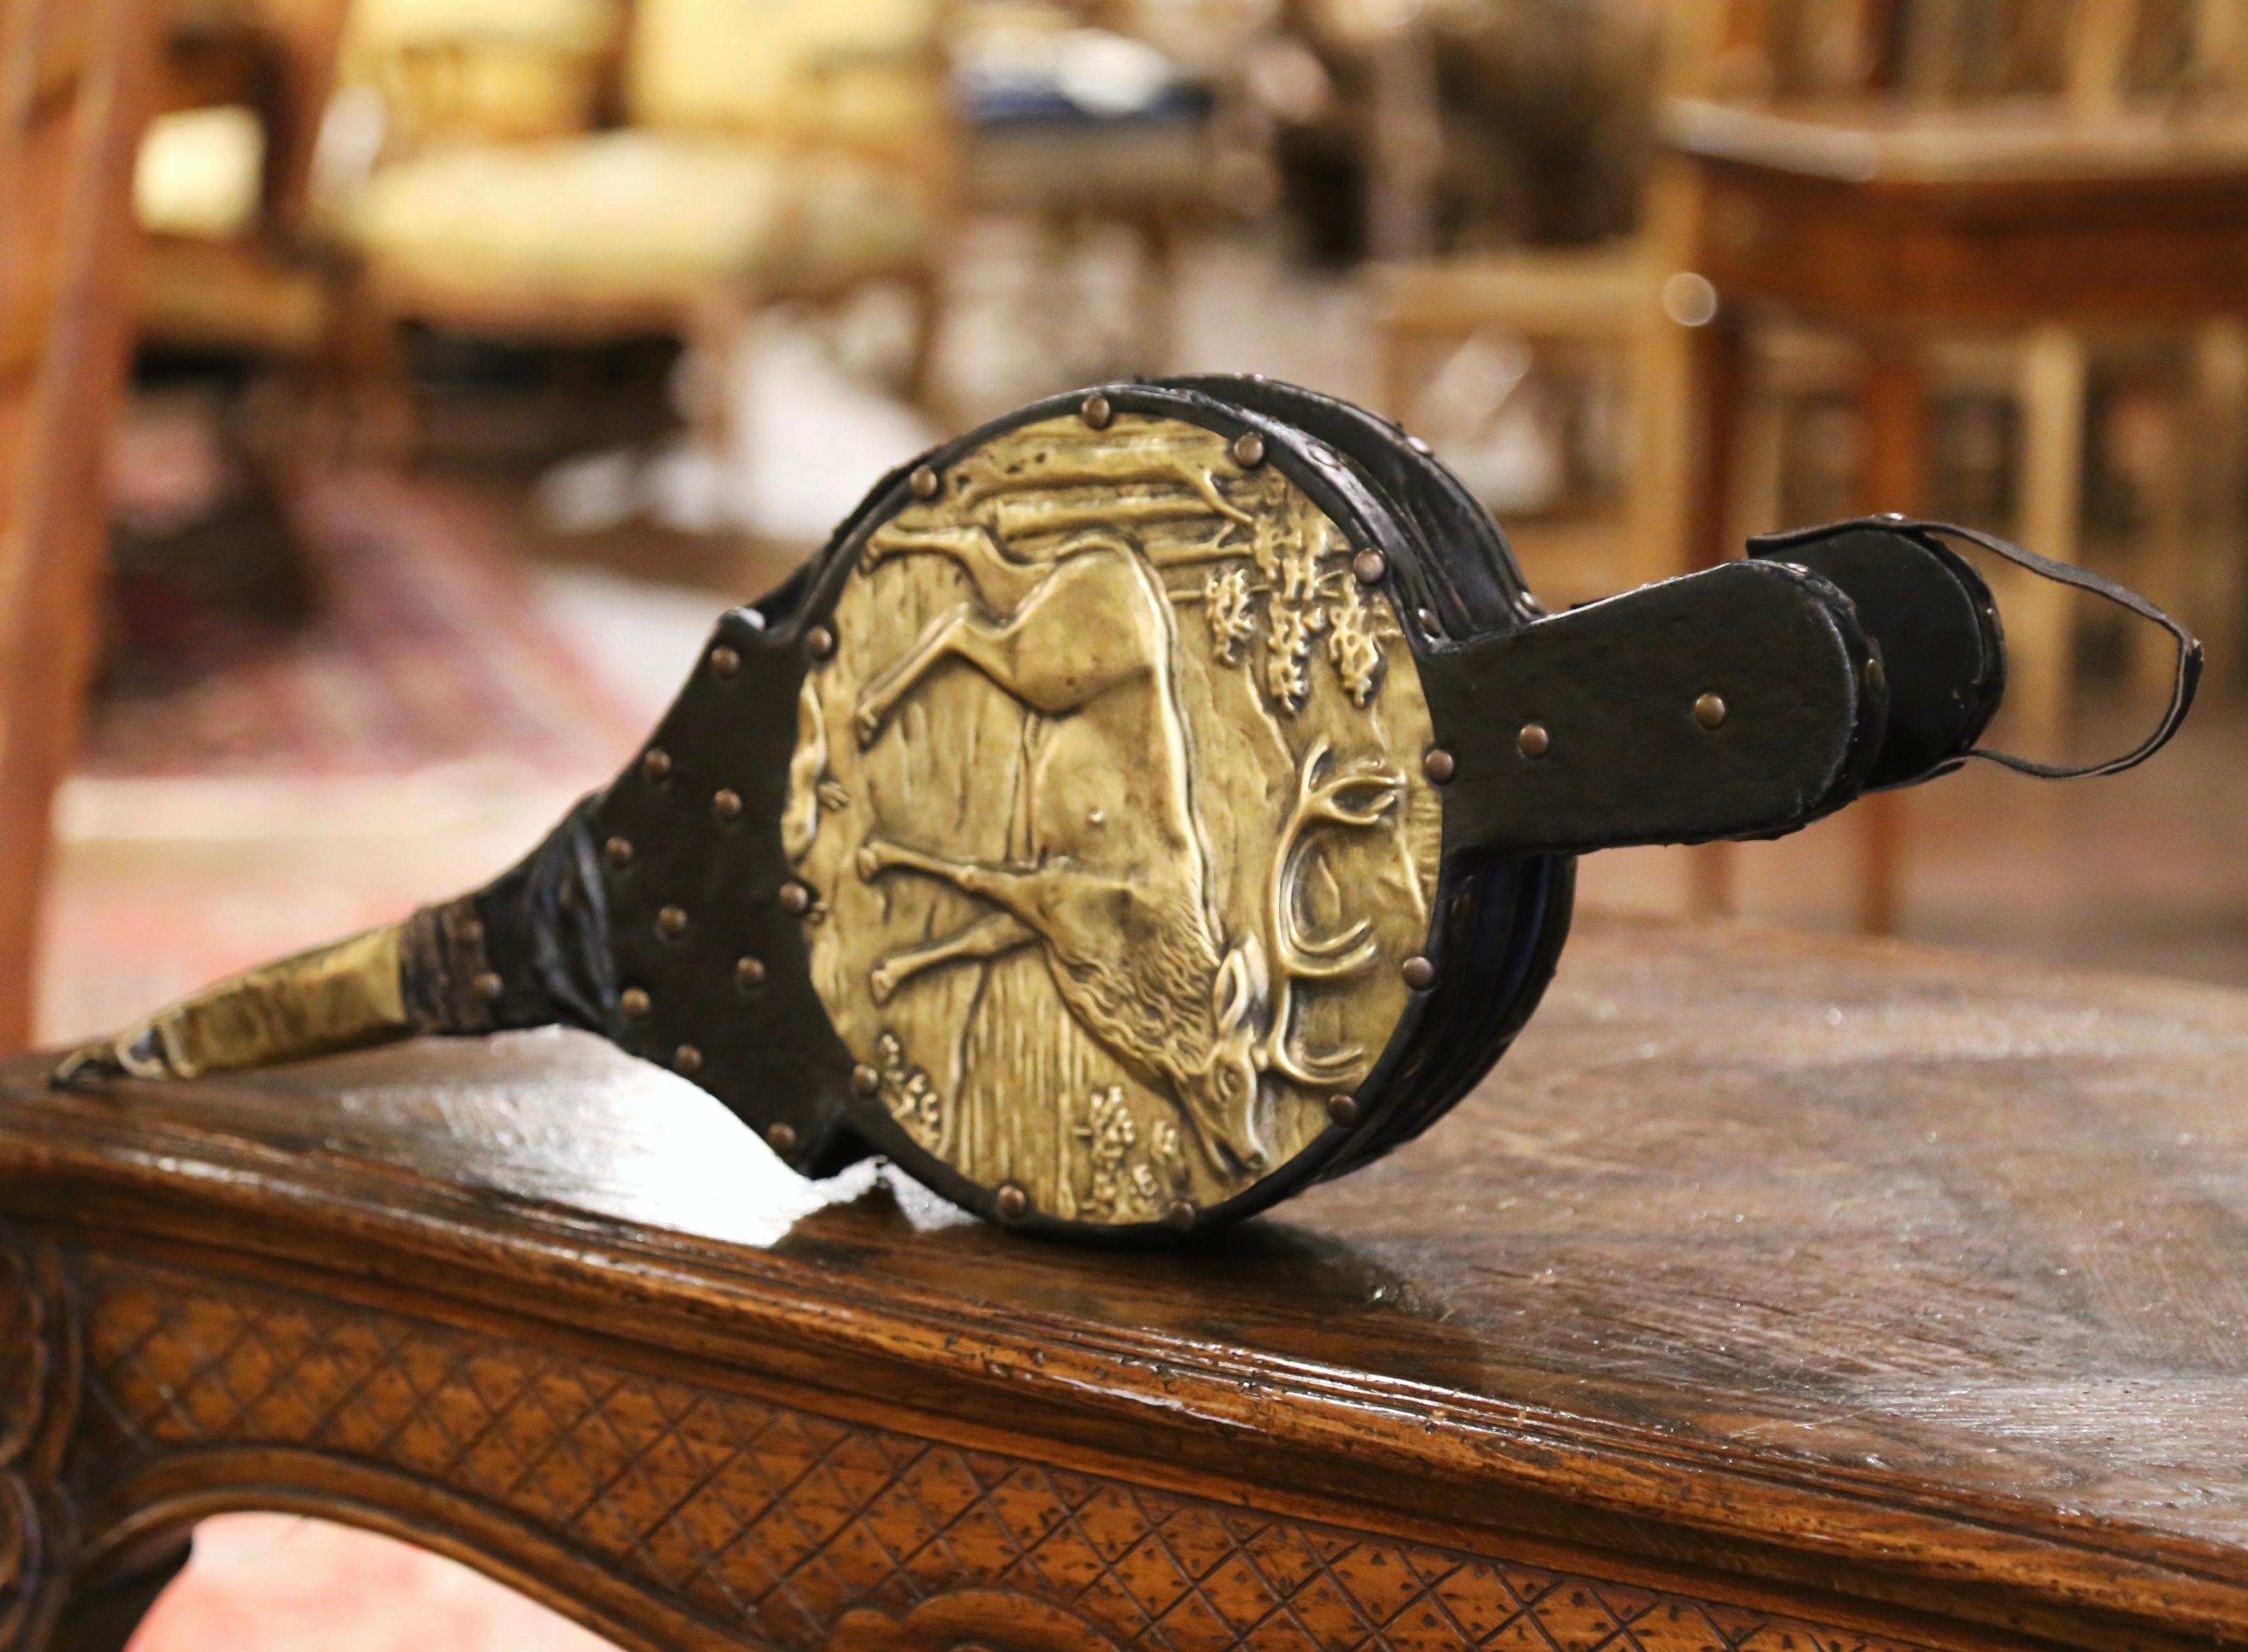 Decorate a fireplace and active the flames with this elegant and useful antique bellows. Crafted in Brittany, France, circa 1880, the fireplace essential features a repousse brass top surface depicting a stag. Double handles at one end, a brass